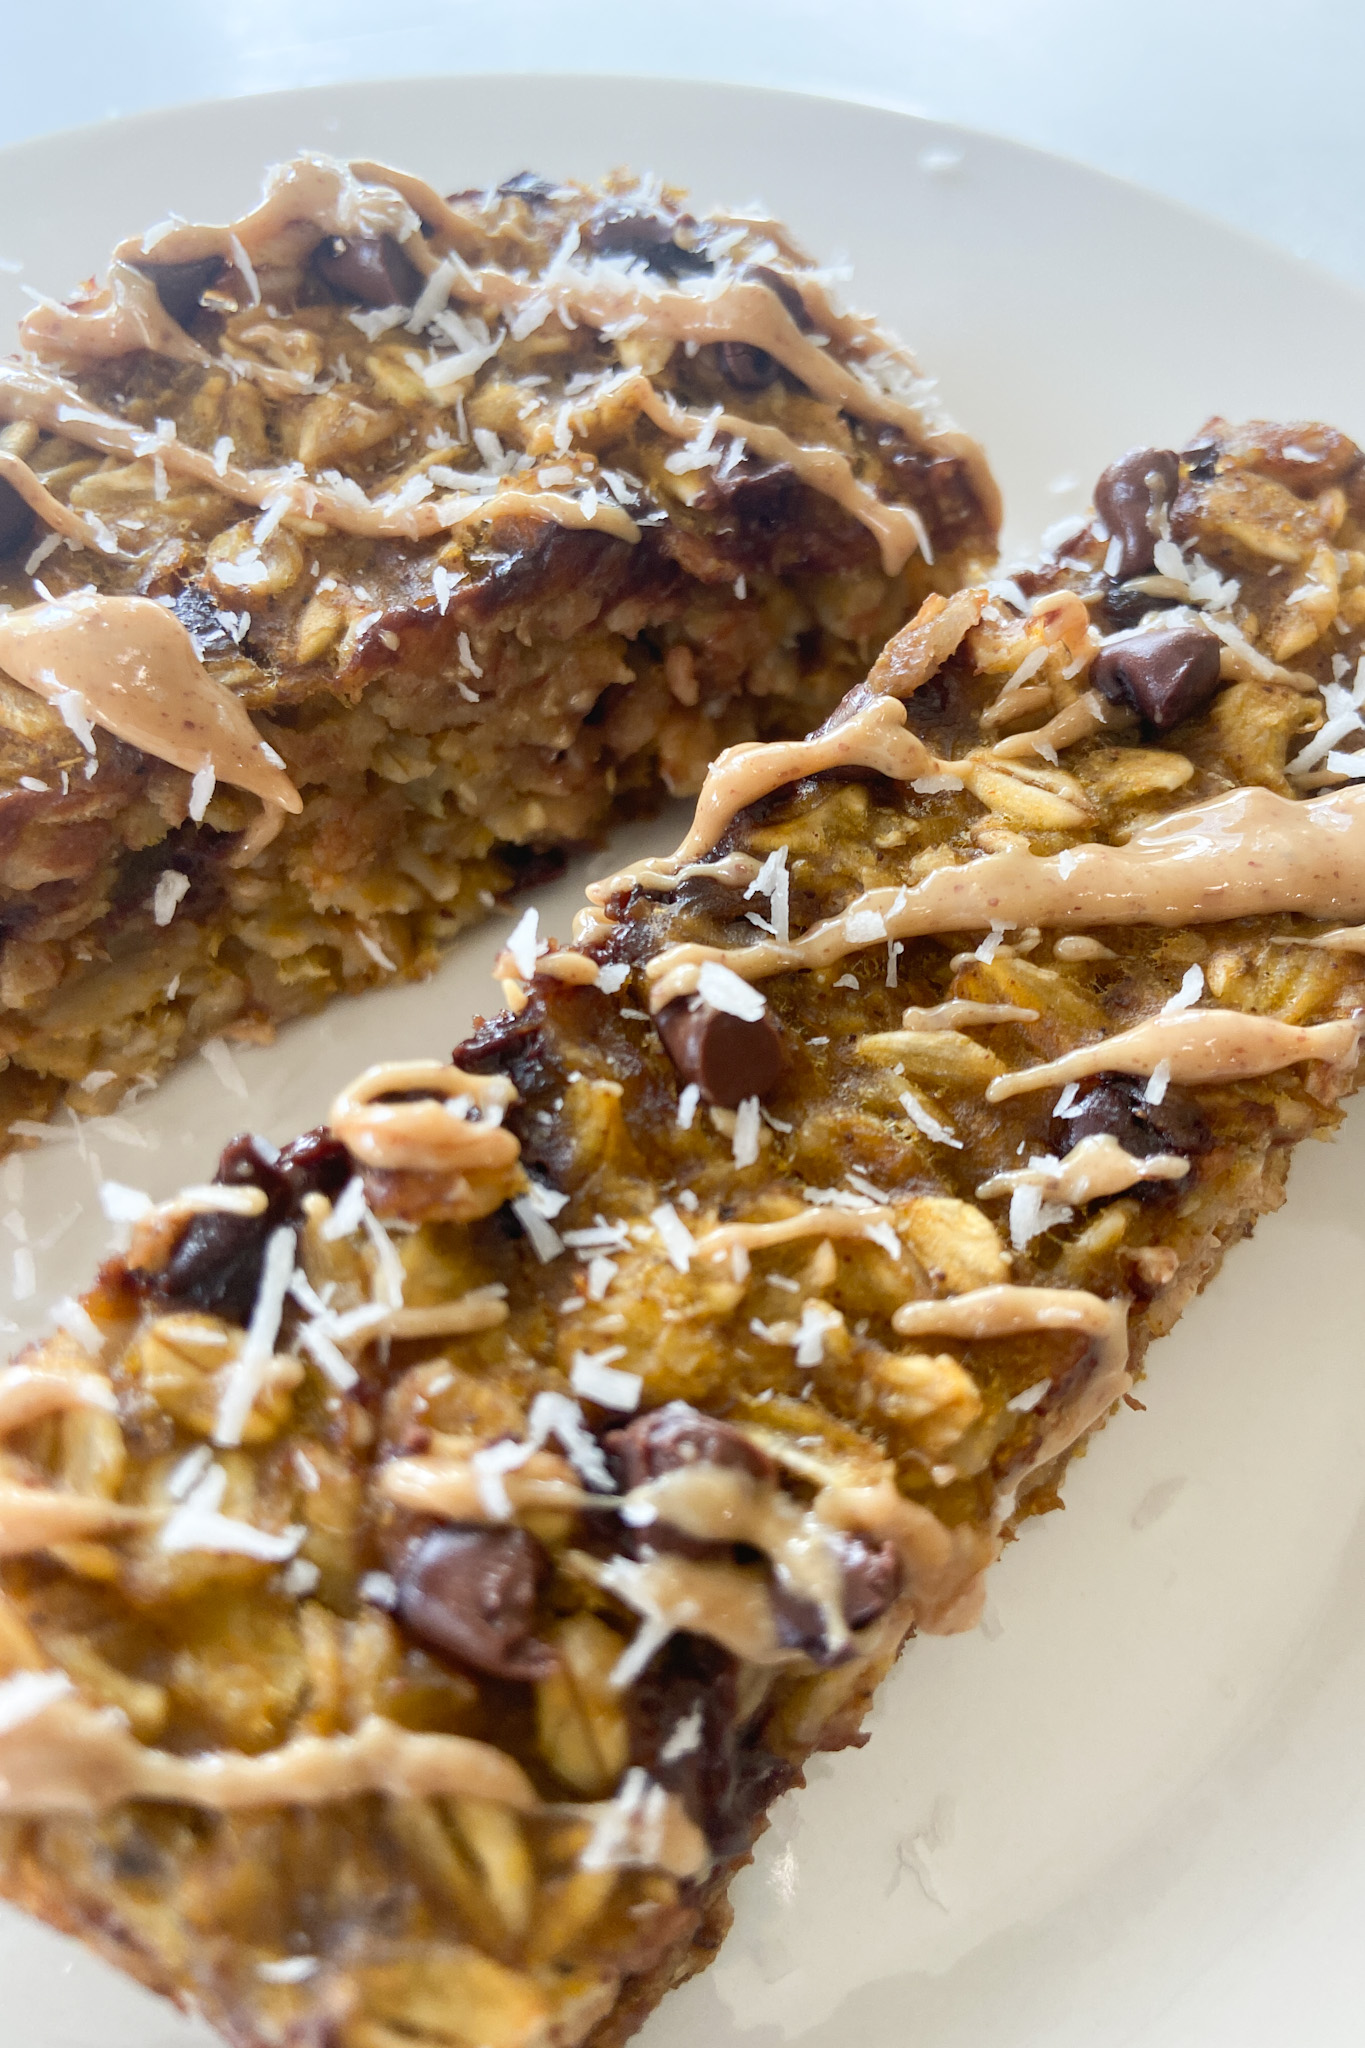 Pumpkin oat bars topped with shredded coconut.